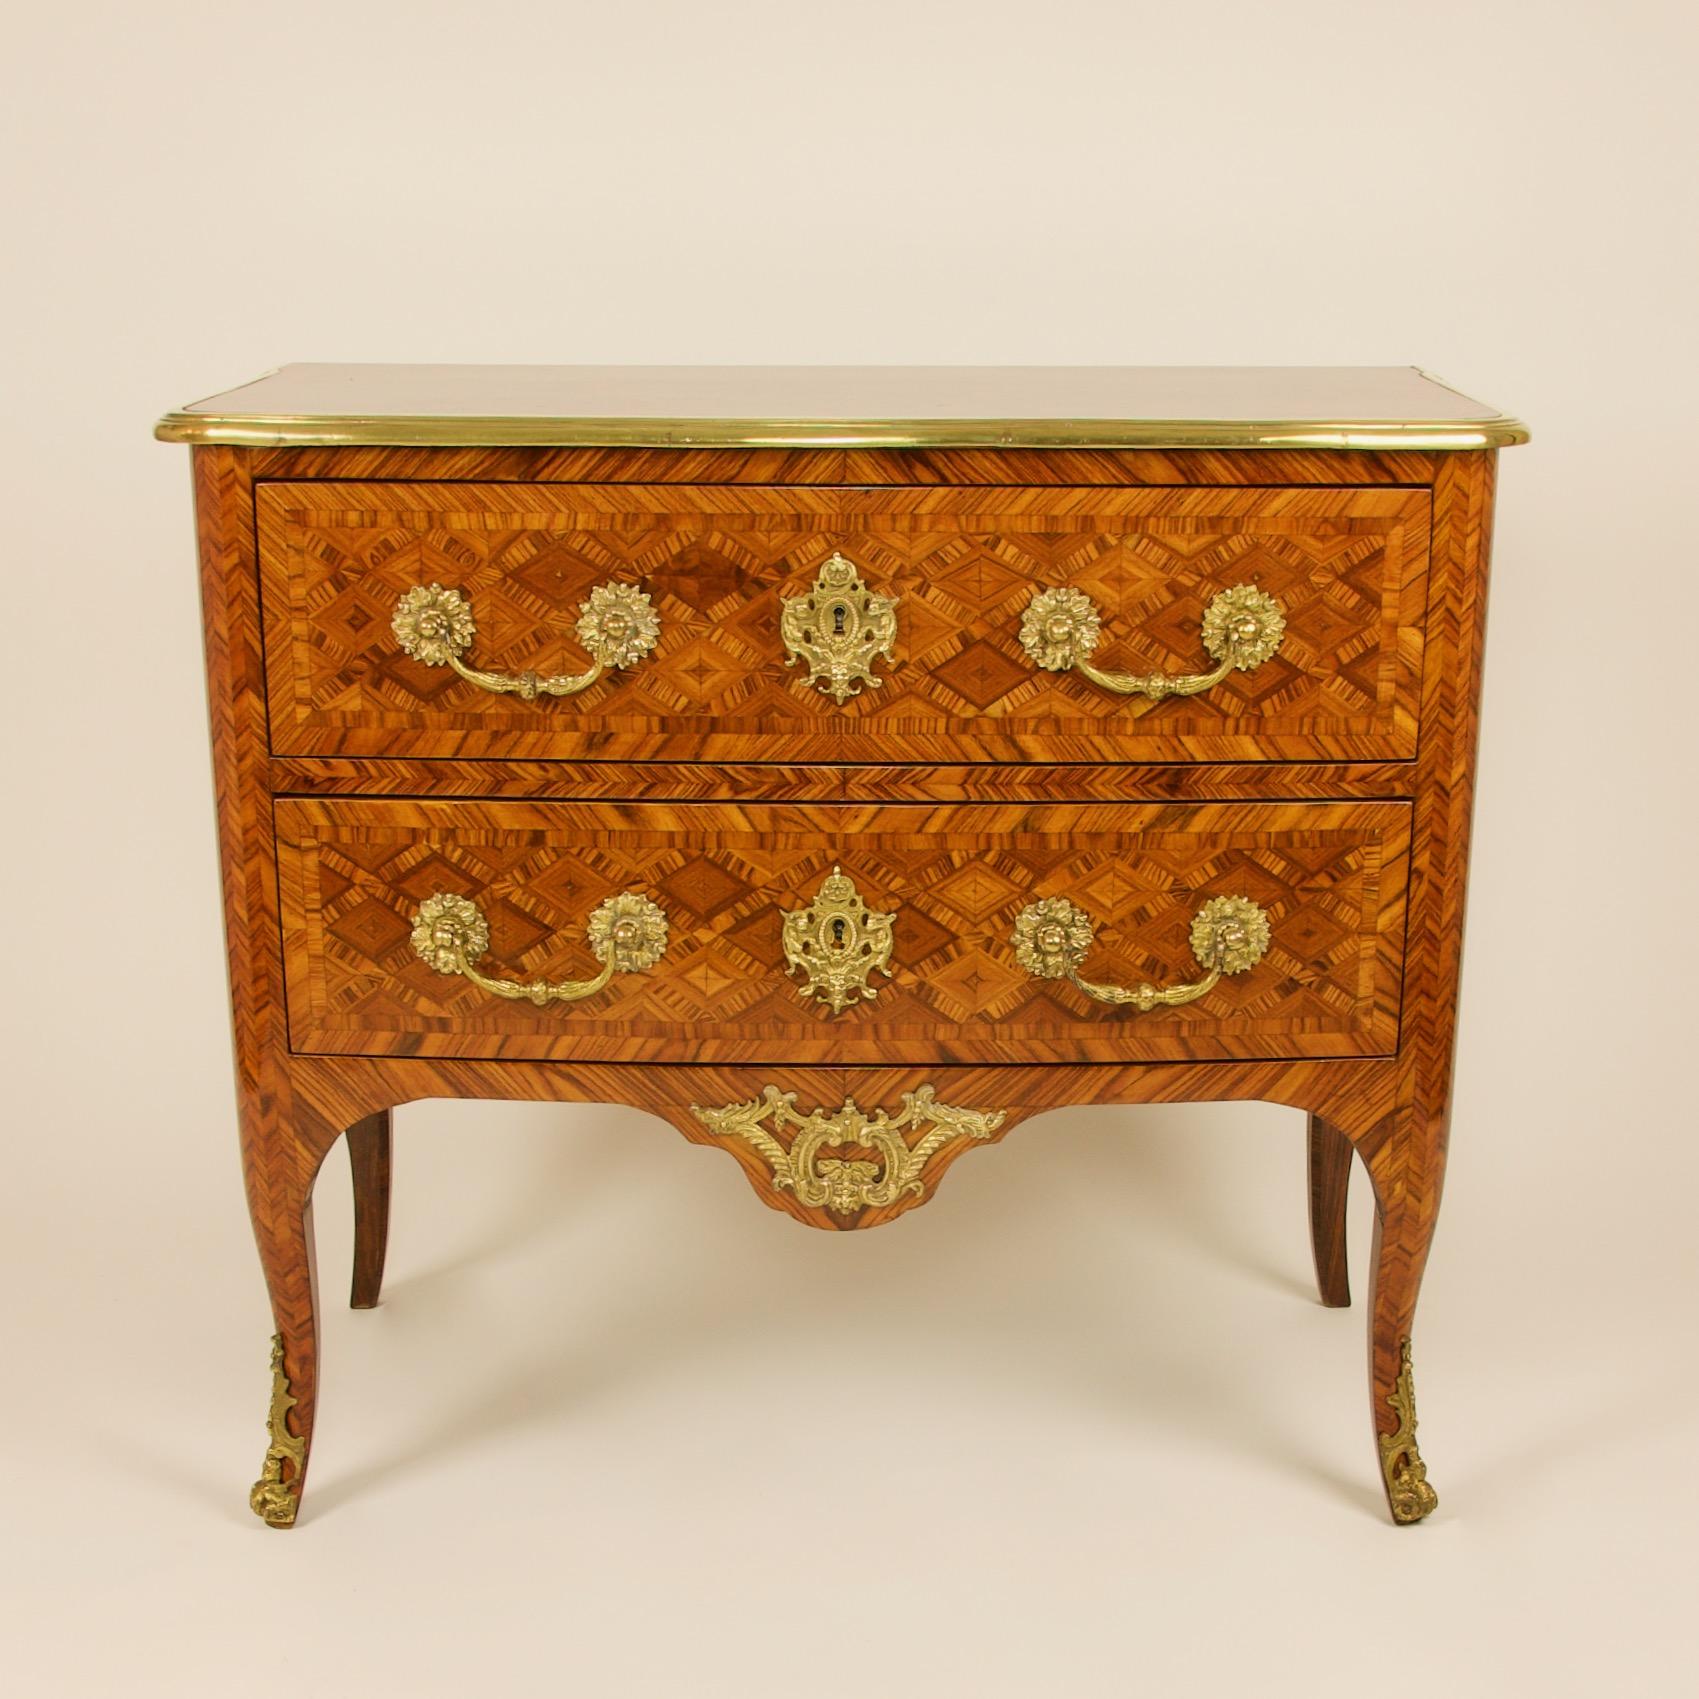 19th Century French Louis XIV Régence Trelliswork marquetry commode or sauteuse

Standing on four cabriole legs the commode or so-called sauteuse holds two frieze drawers of bowfront form with Régence or Baroque style movable handles and